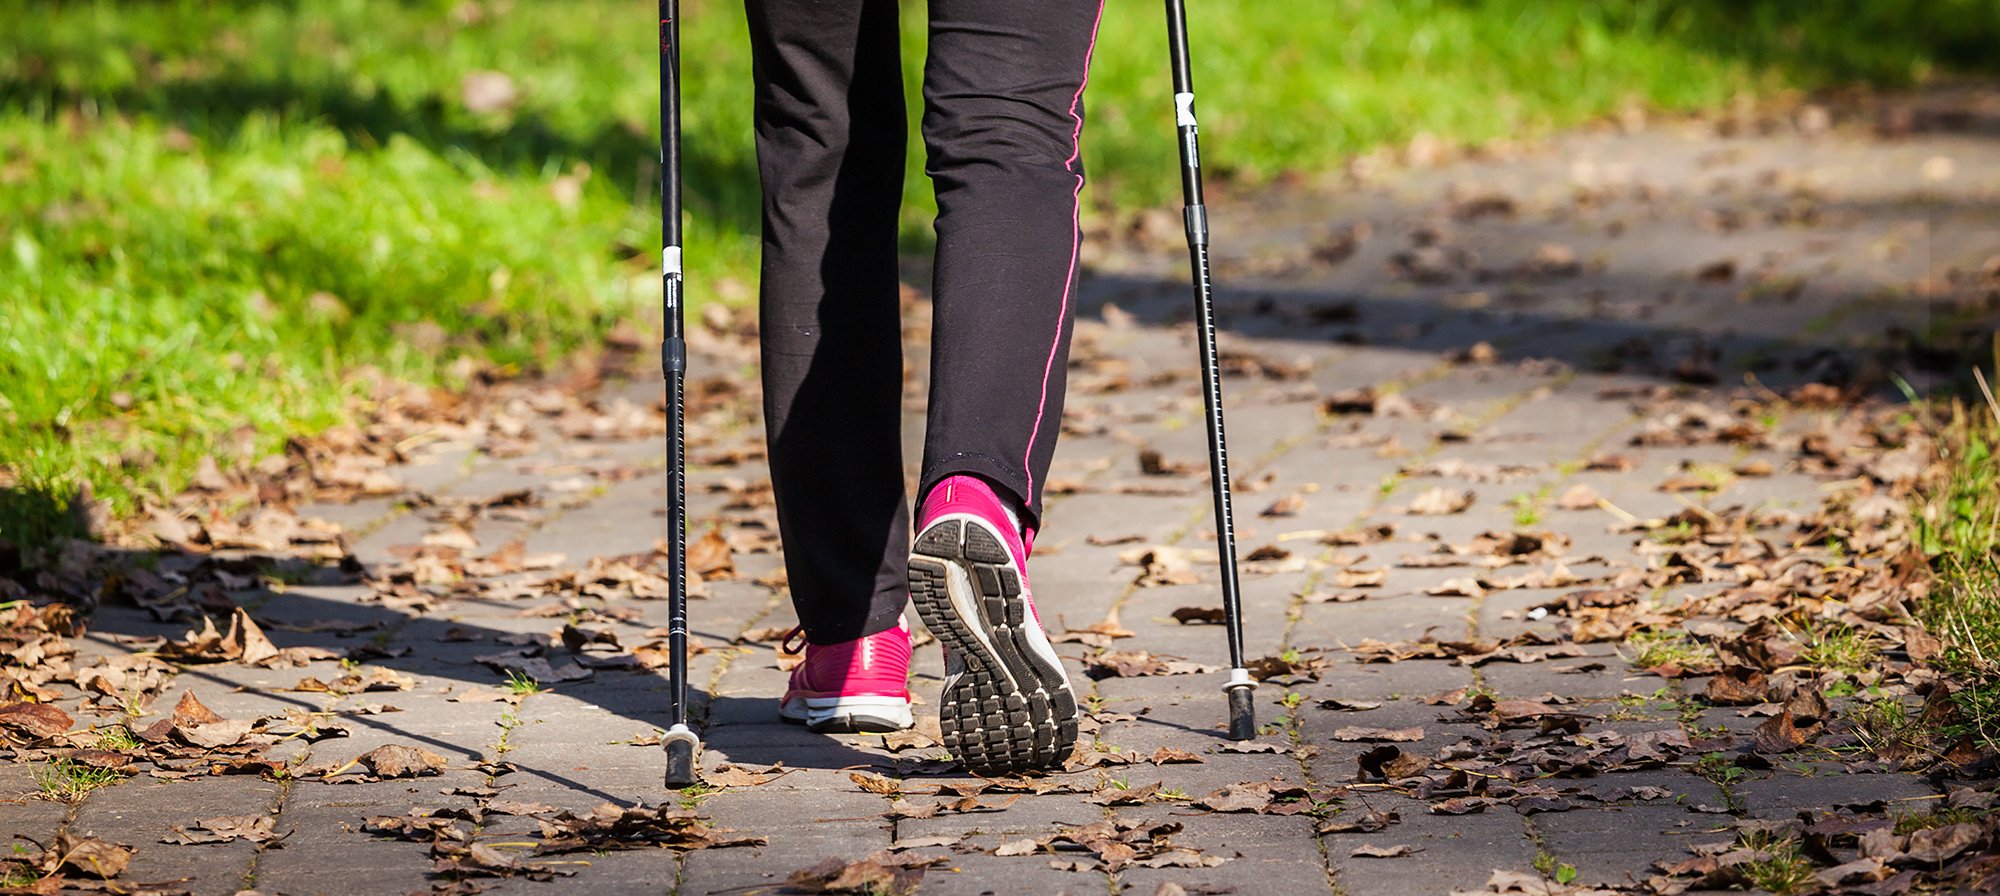 Try Nordic Pole Walking For a Unique, Total-Body Workout